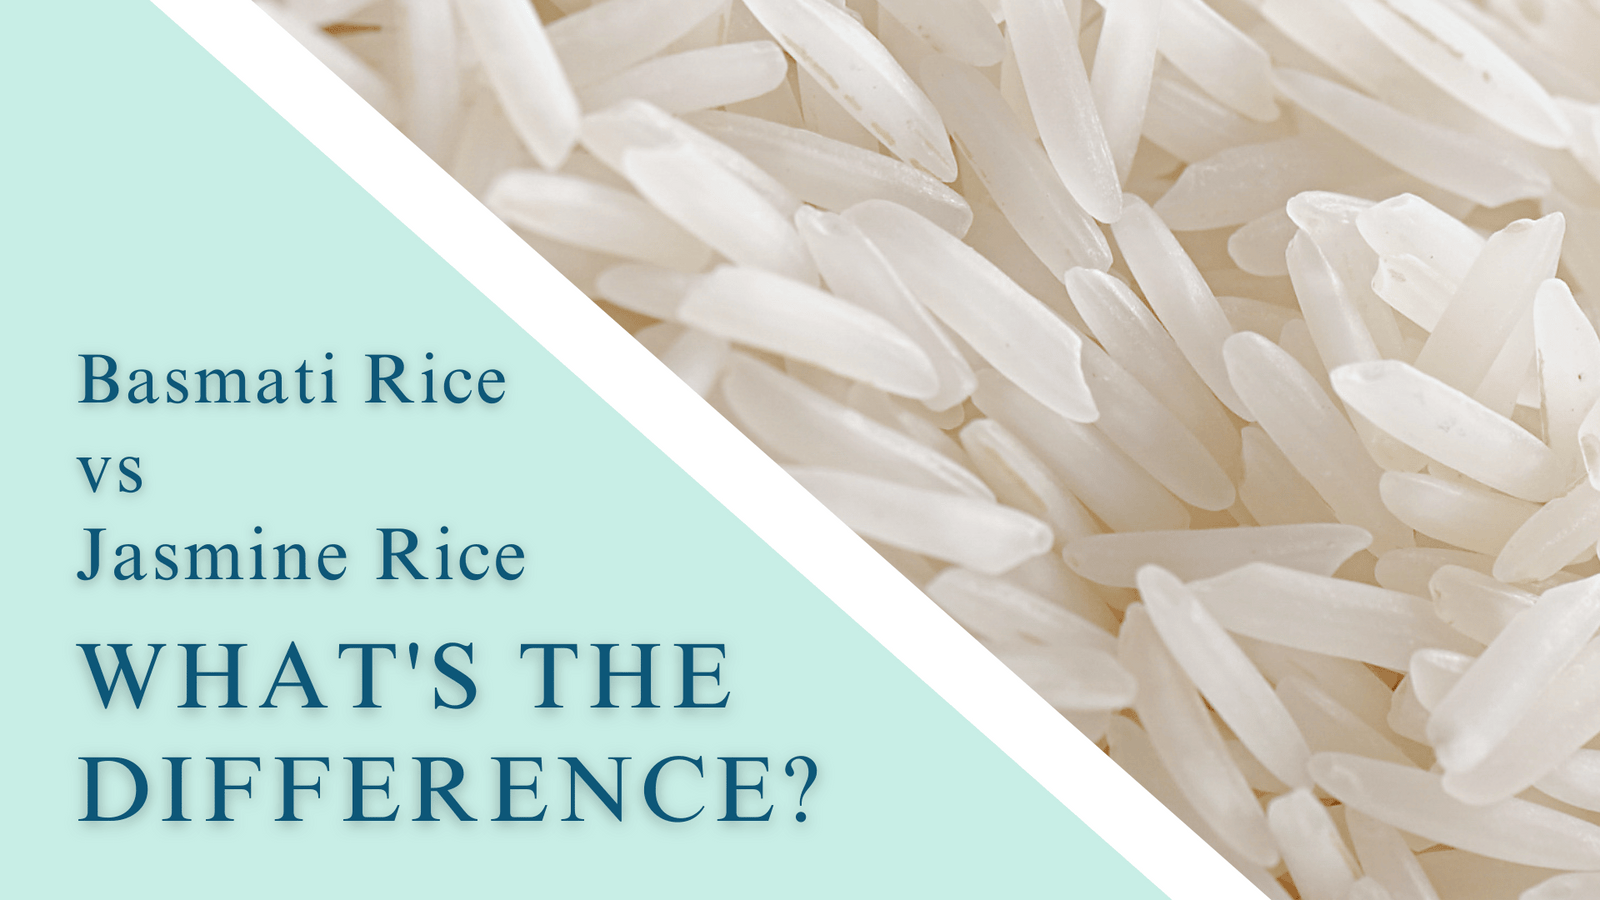 Basmati Rice vs Jasmine Rice - What's the Difference?